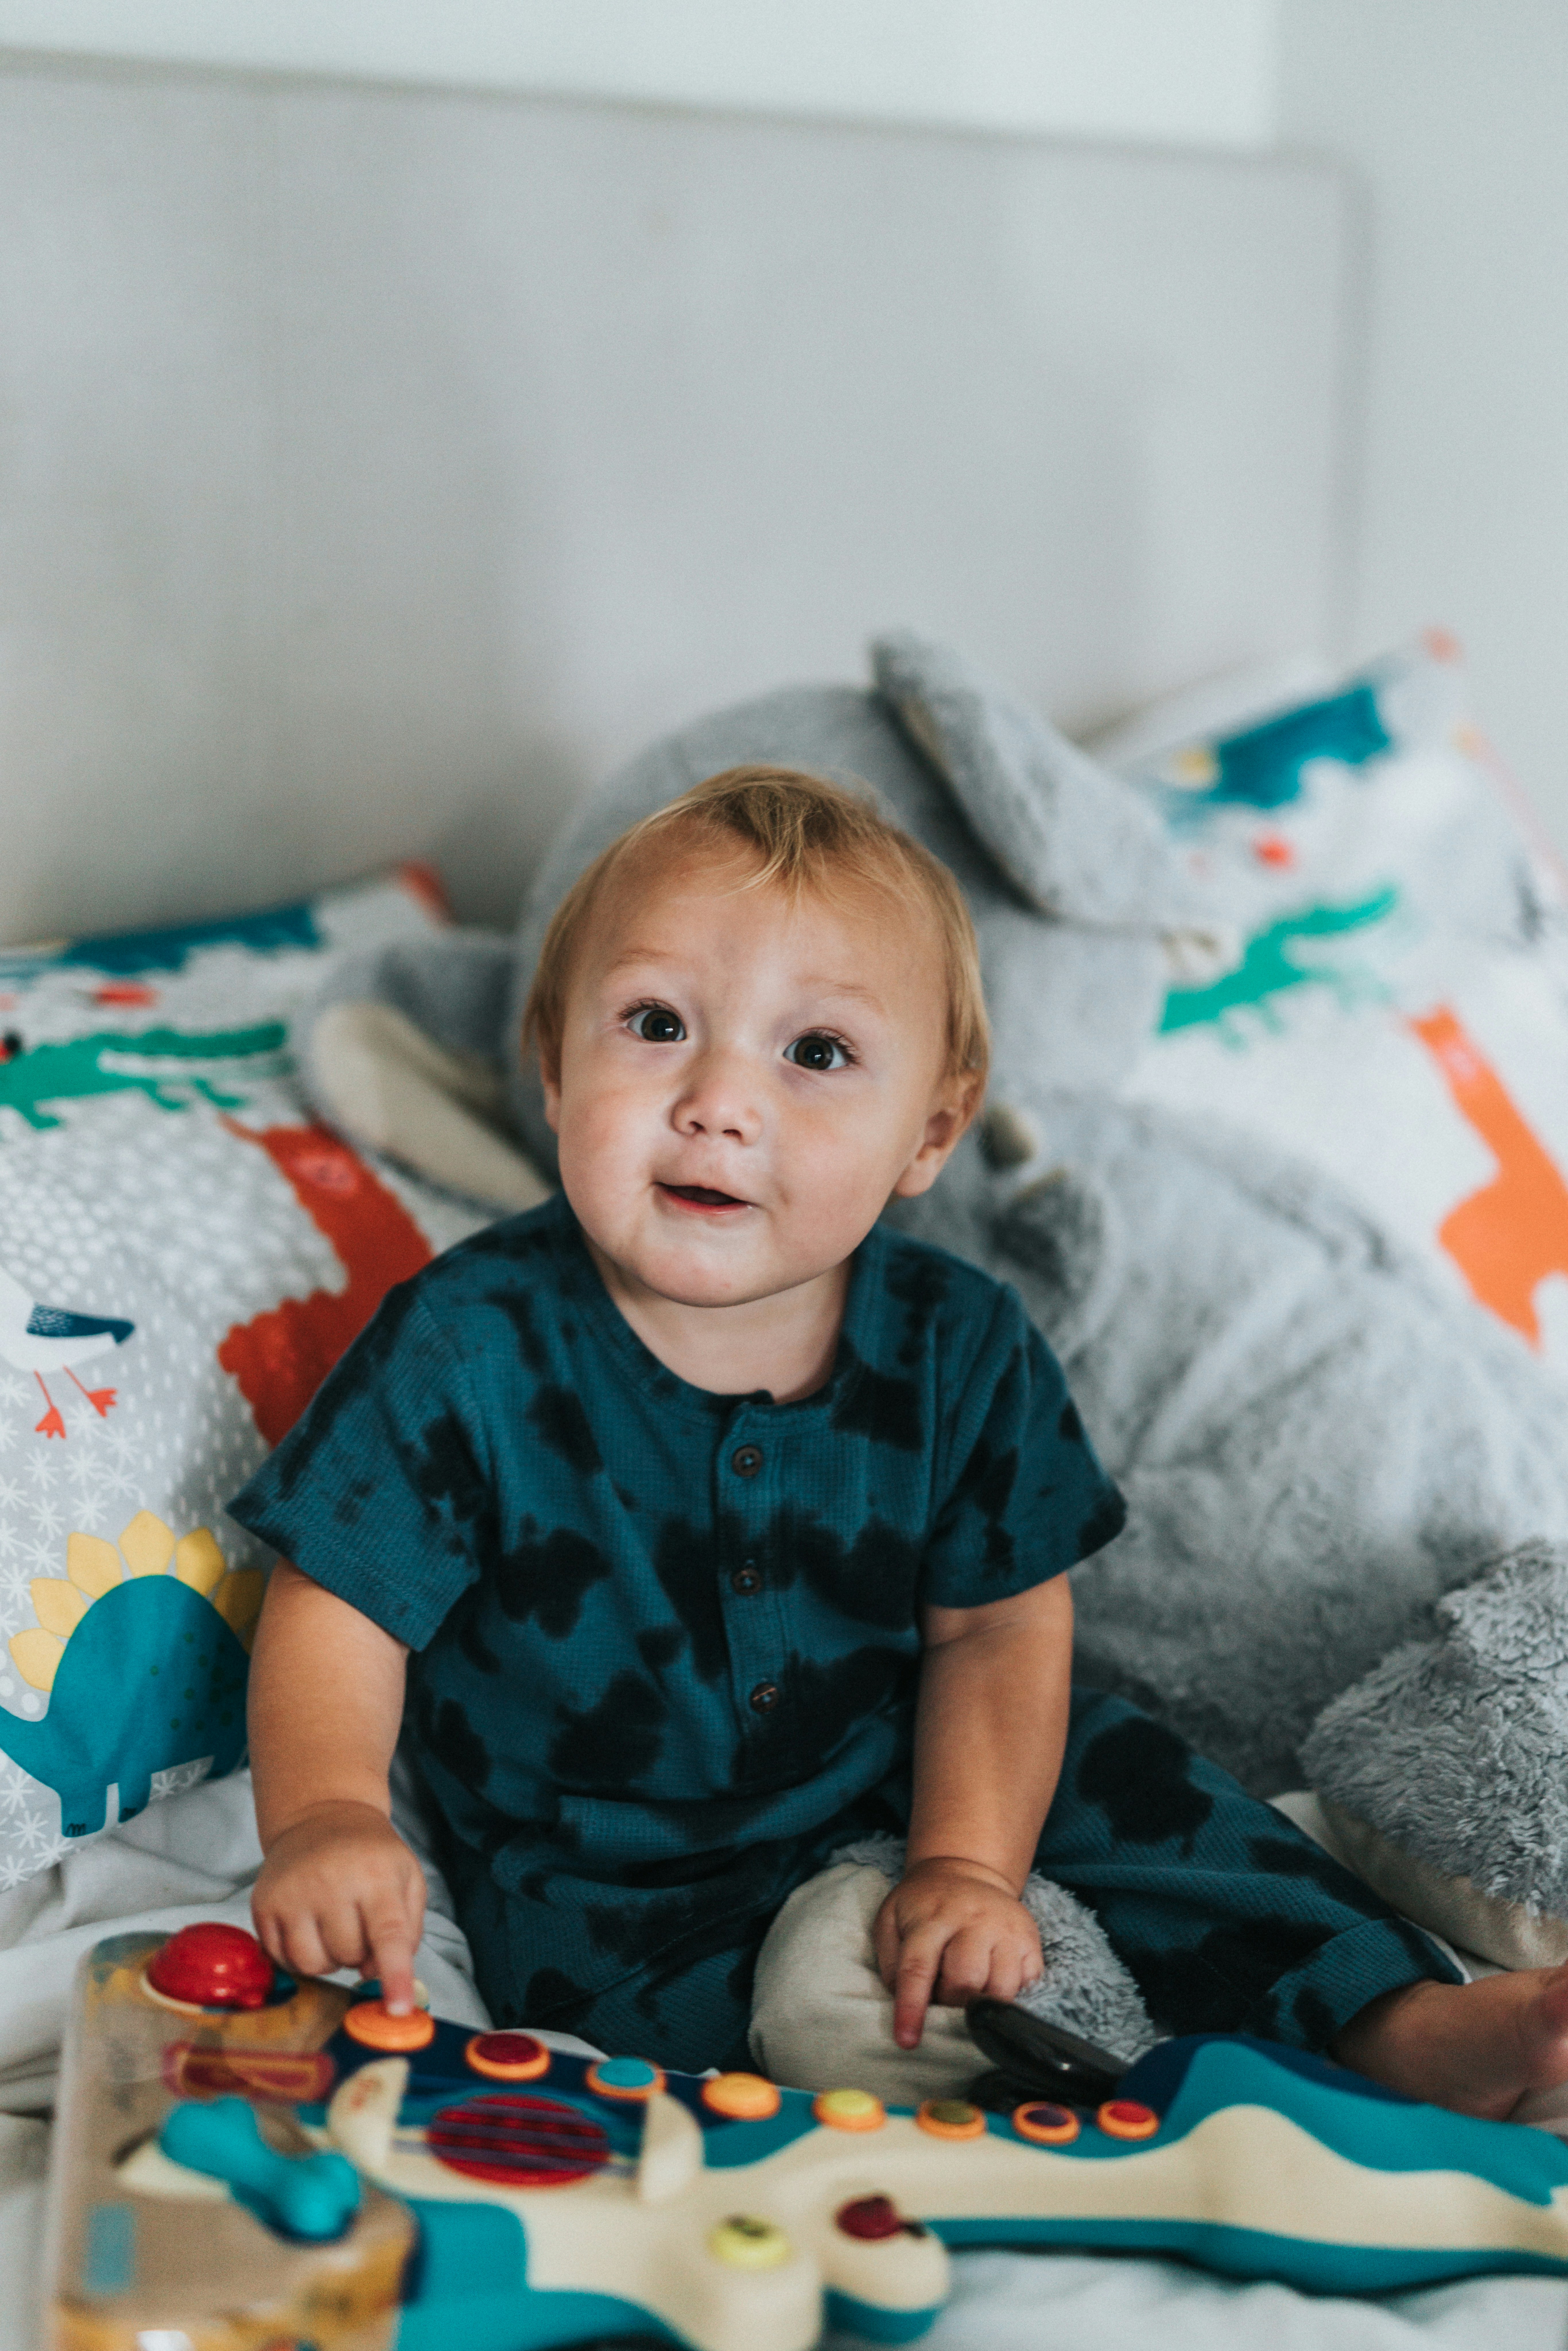 Choose from a curated selection of baby photos. Always free on Unsplash.